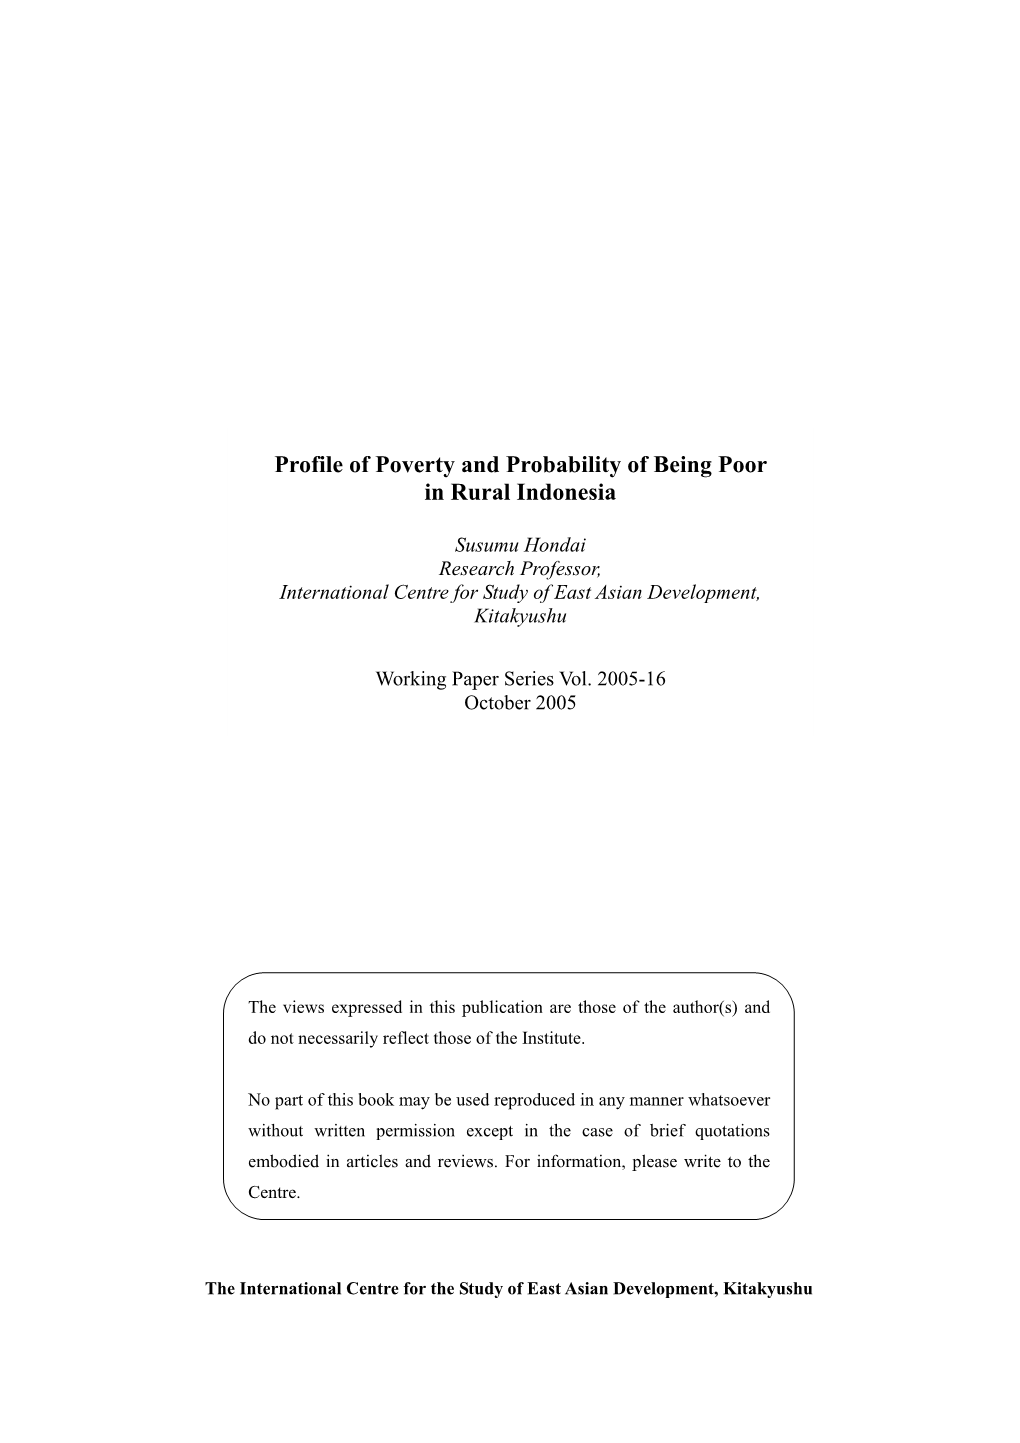 Profile of Poverty and Probability of Being Poor in Rural Indonesia